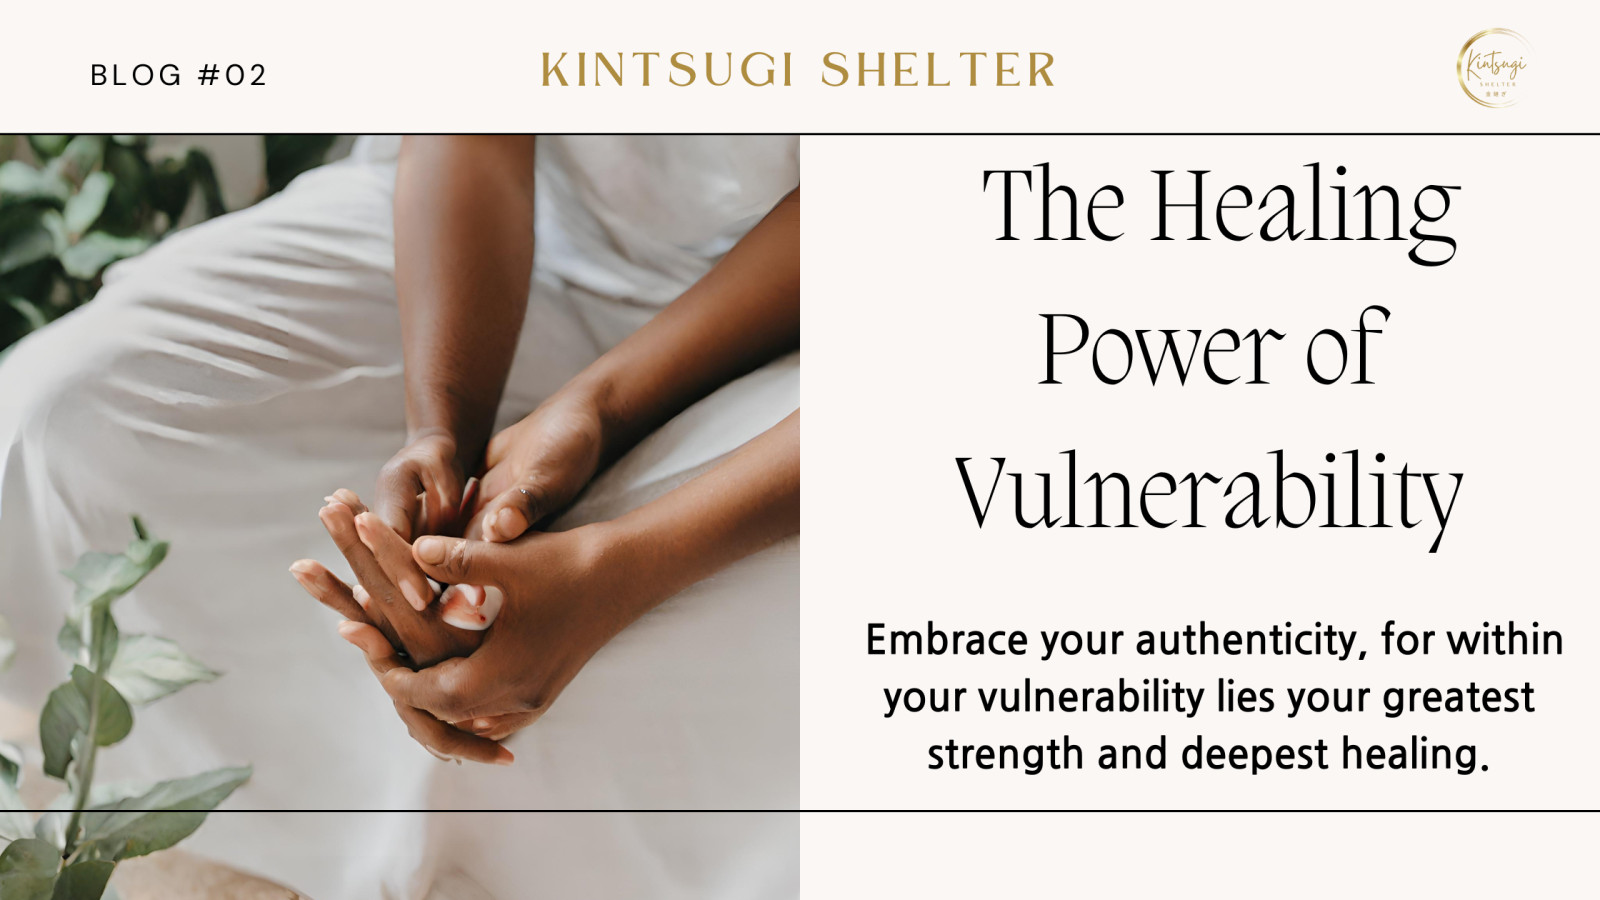 The Healing Power of Vulnerability